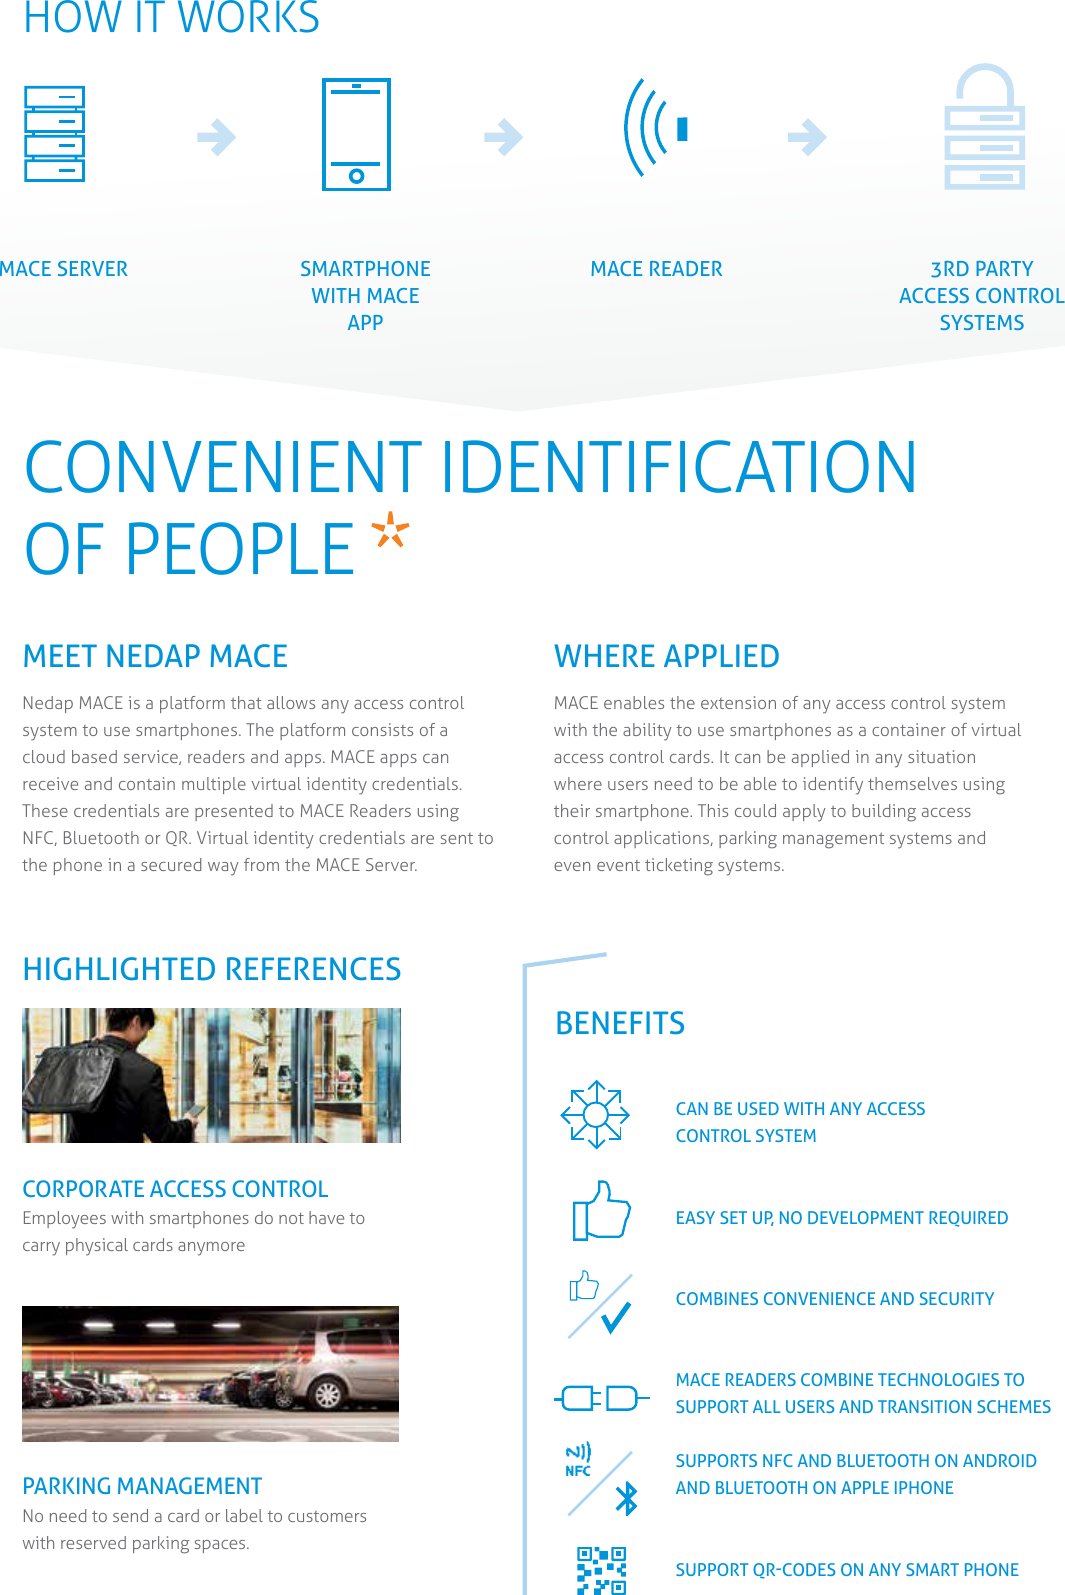 HOW IT WORKSMACECONVENIENT IDENTIFICATION OF PEOPLE   MEET NEDAP MACE Nedap MACE is a platform that allows any access control system to use smartphones. The platform consists of a cloud based service, readers and apps. MACE apps can receive and contain multiple virtual identity credentials. These credentials are presented to MACE Readers using NFC, Bluetooth or QR. Virtual identity credentials are sent to the phone in a secured way from the MACE Server. WHERE APPLIEDMACE enables the extension of any access control system with the ability to use smartphones as a container of virtual access control cards. It can be applied in any situation where users need to be able to identify themselves using their smartphone. This could apply to building access control applications, parking management systems and even event ticketing systems.BENEFITSCAN BE USED WITH ANY ACCESS  CONTROL SYSTEMEASY SET UP, NO DEVELOPMENT REQUIREDCOMBINES CONVENIENCE AND SECURITYMACE READERS COMBINE TECHNOLOGIES TO  SUPPORT ALL USERS AND TRANSITION SCHEMESSUPPORTS NFC AND BLUETOOTH ON ANDROID AND BLUETOOTH ON APPLE IPHONESUPPORT QR-CODES ON ANY SMART PHONECORPORATE ACCESS CONTROL Employees with smartphones do not have to  carry physical cards anymorePARKING MANAGEMENTNo need to send a card or label to customers with reserved parking spaces.HIGHLIGHTED REFERENCESMACE SERVER SMARTPHONE WITH MACE APPMACE READER 3RD PARTY ACCESS CONTROL SYSTEMS